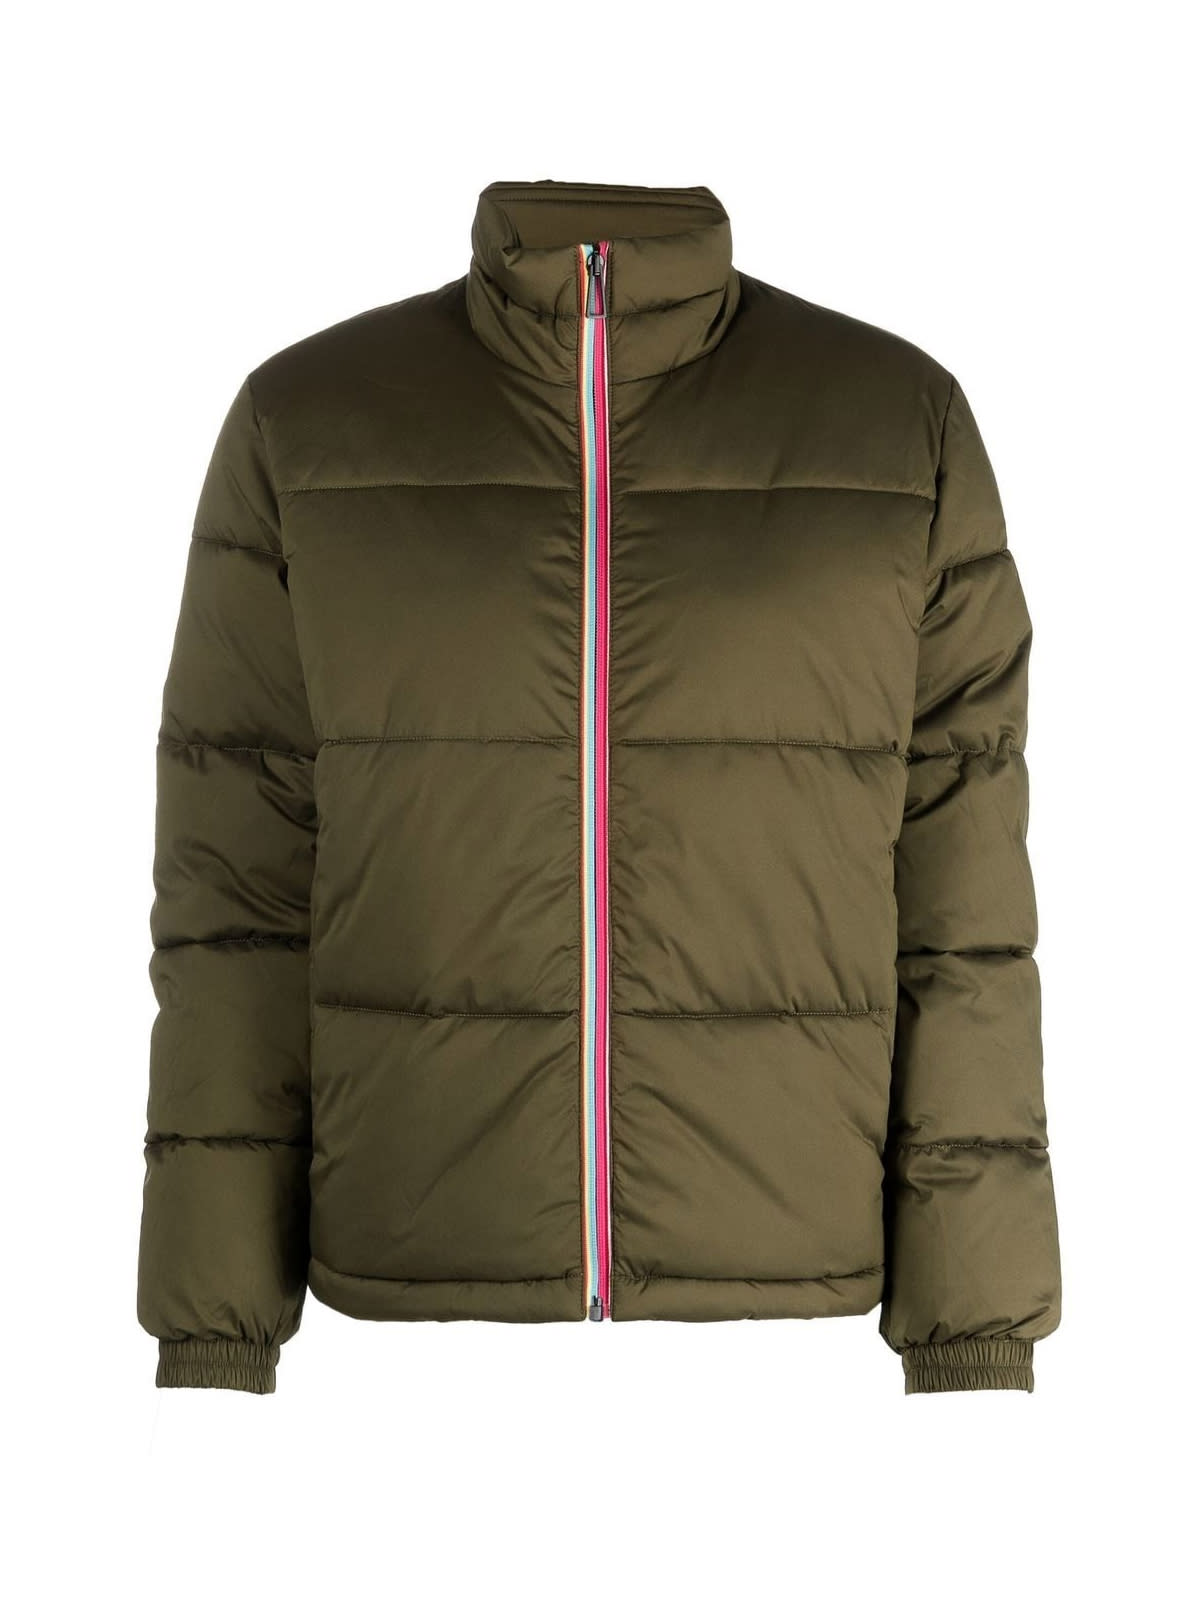 PS by Paul Smith Womens Fibre Down Jacket